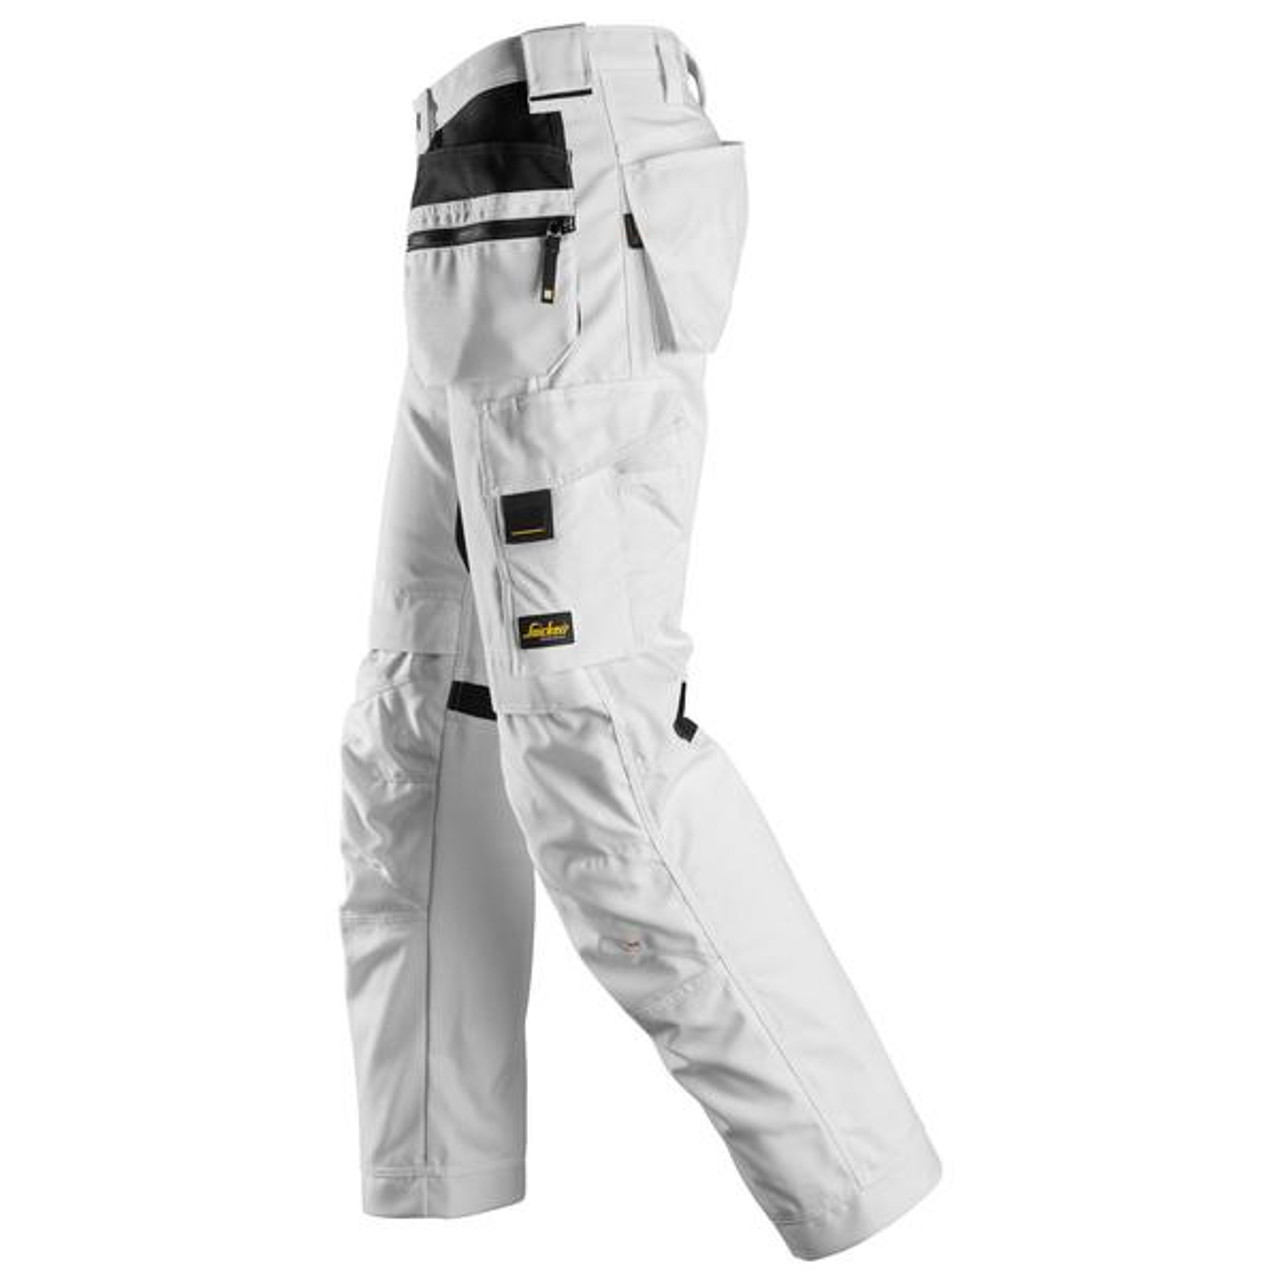 Buy online in Australia and New Zealand SNICKERS Canvas with Stretch White Trousers for Painters that have Holster Pockets